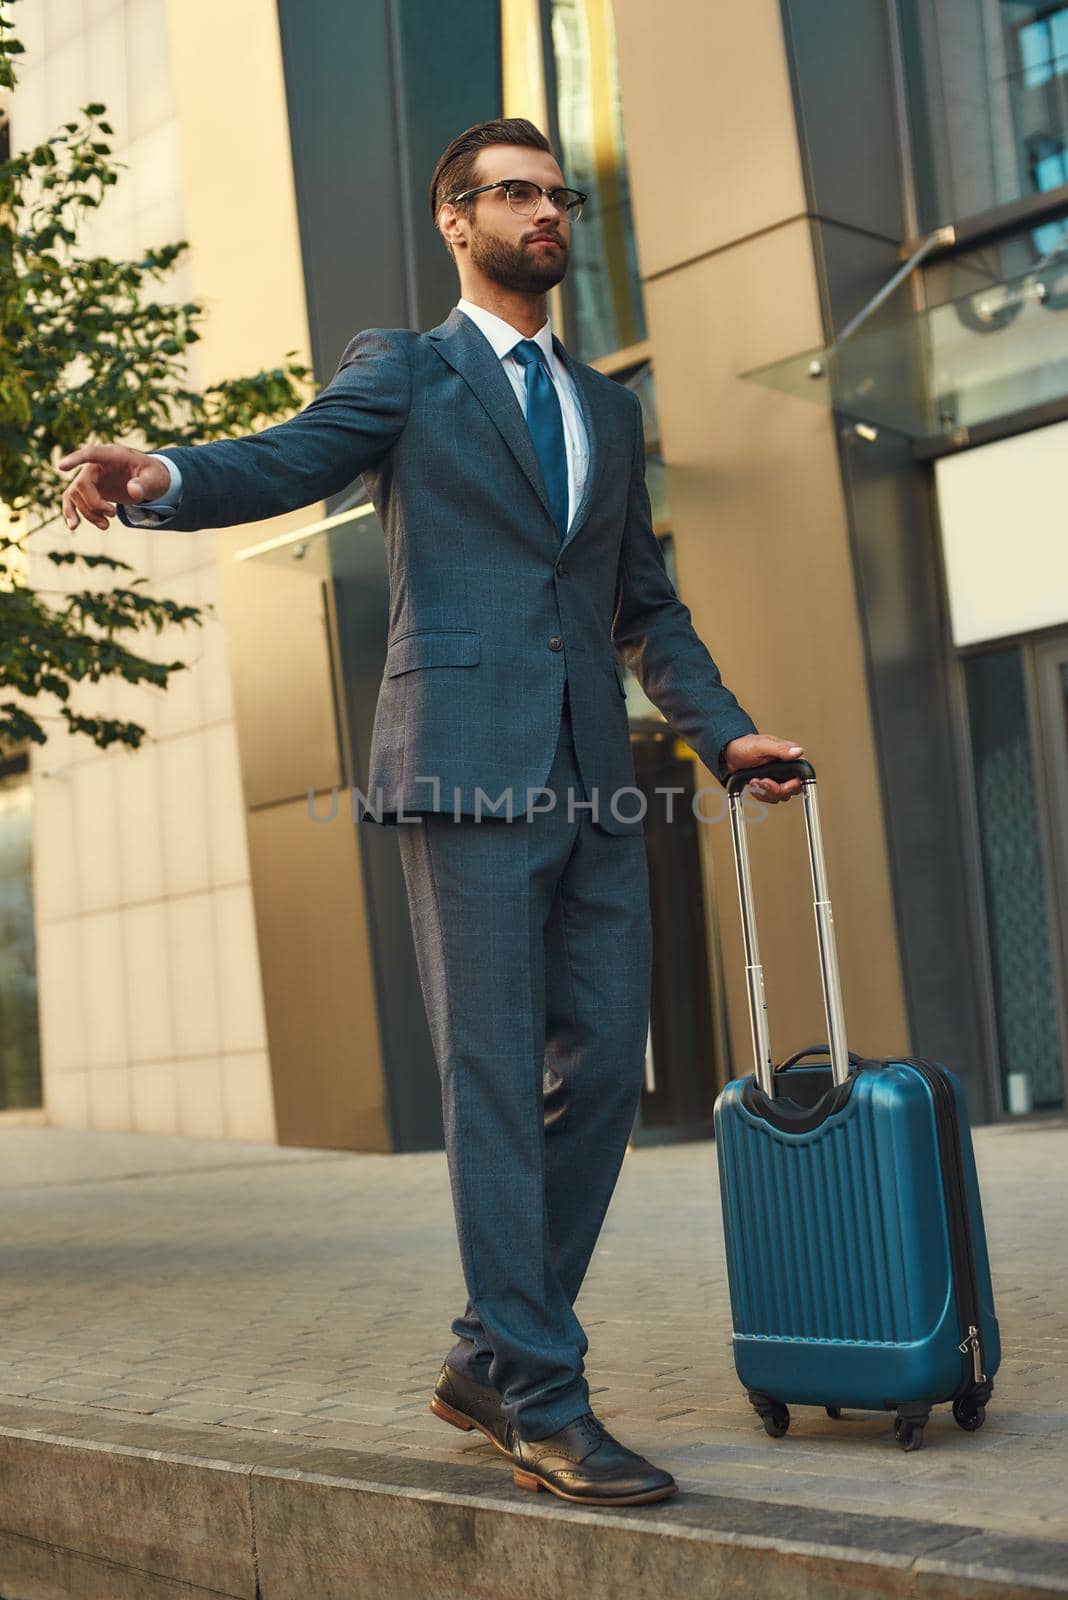 Catching taxi. Full length of young and handsome bearded man in suit carrying suitcase and raising his arm while standing outdoors. Travelling. Business trip